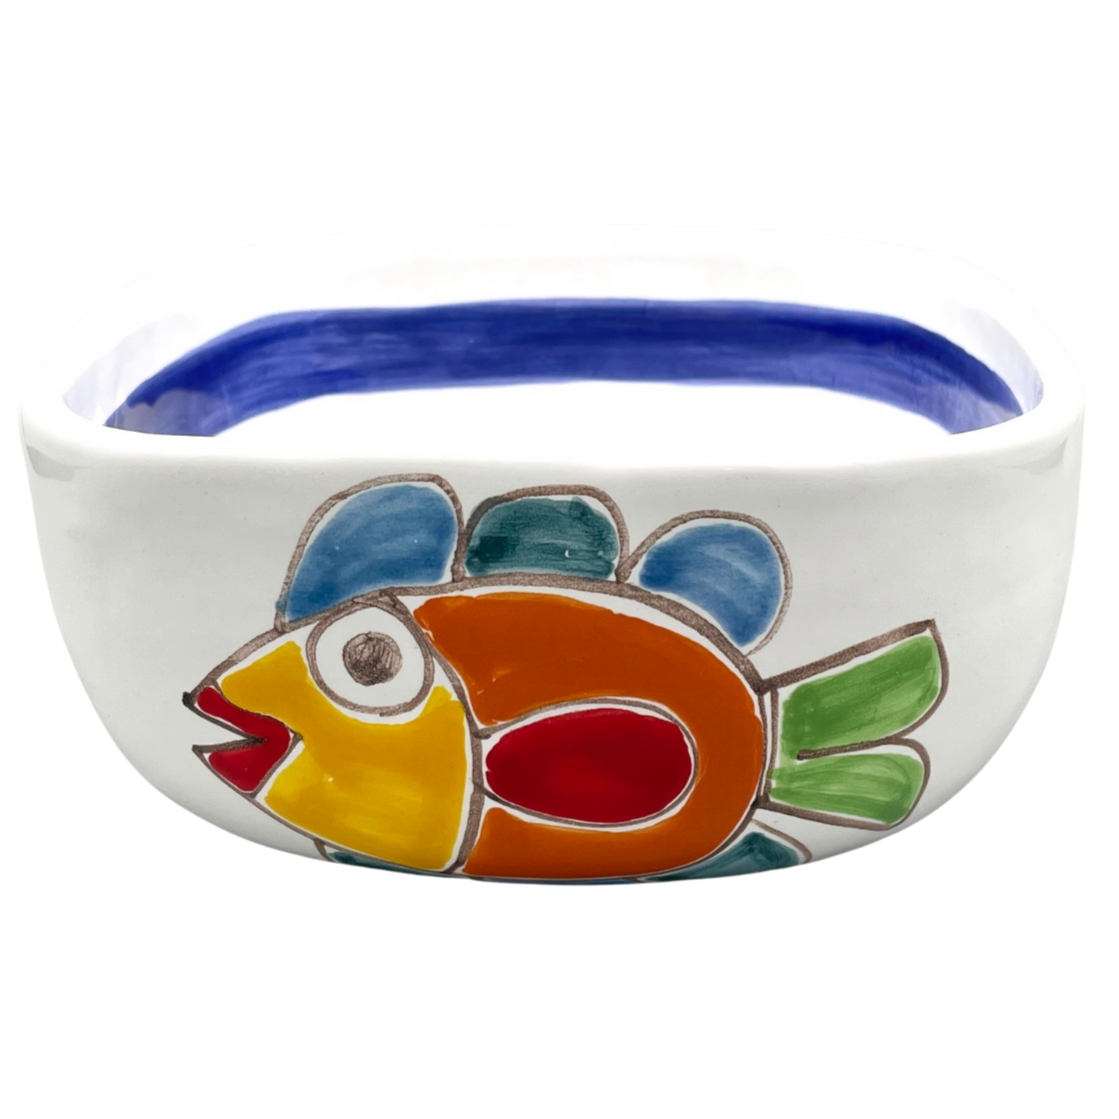 Fish and Octopus Square Bowl